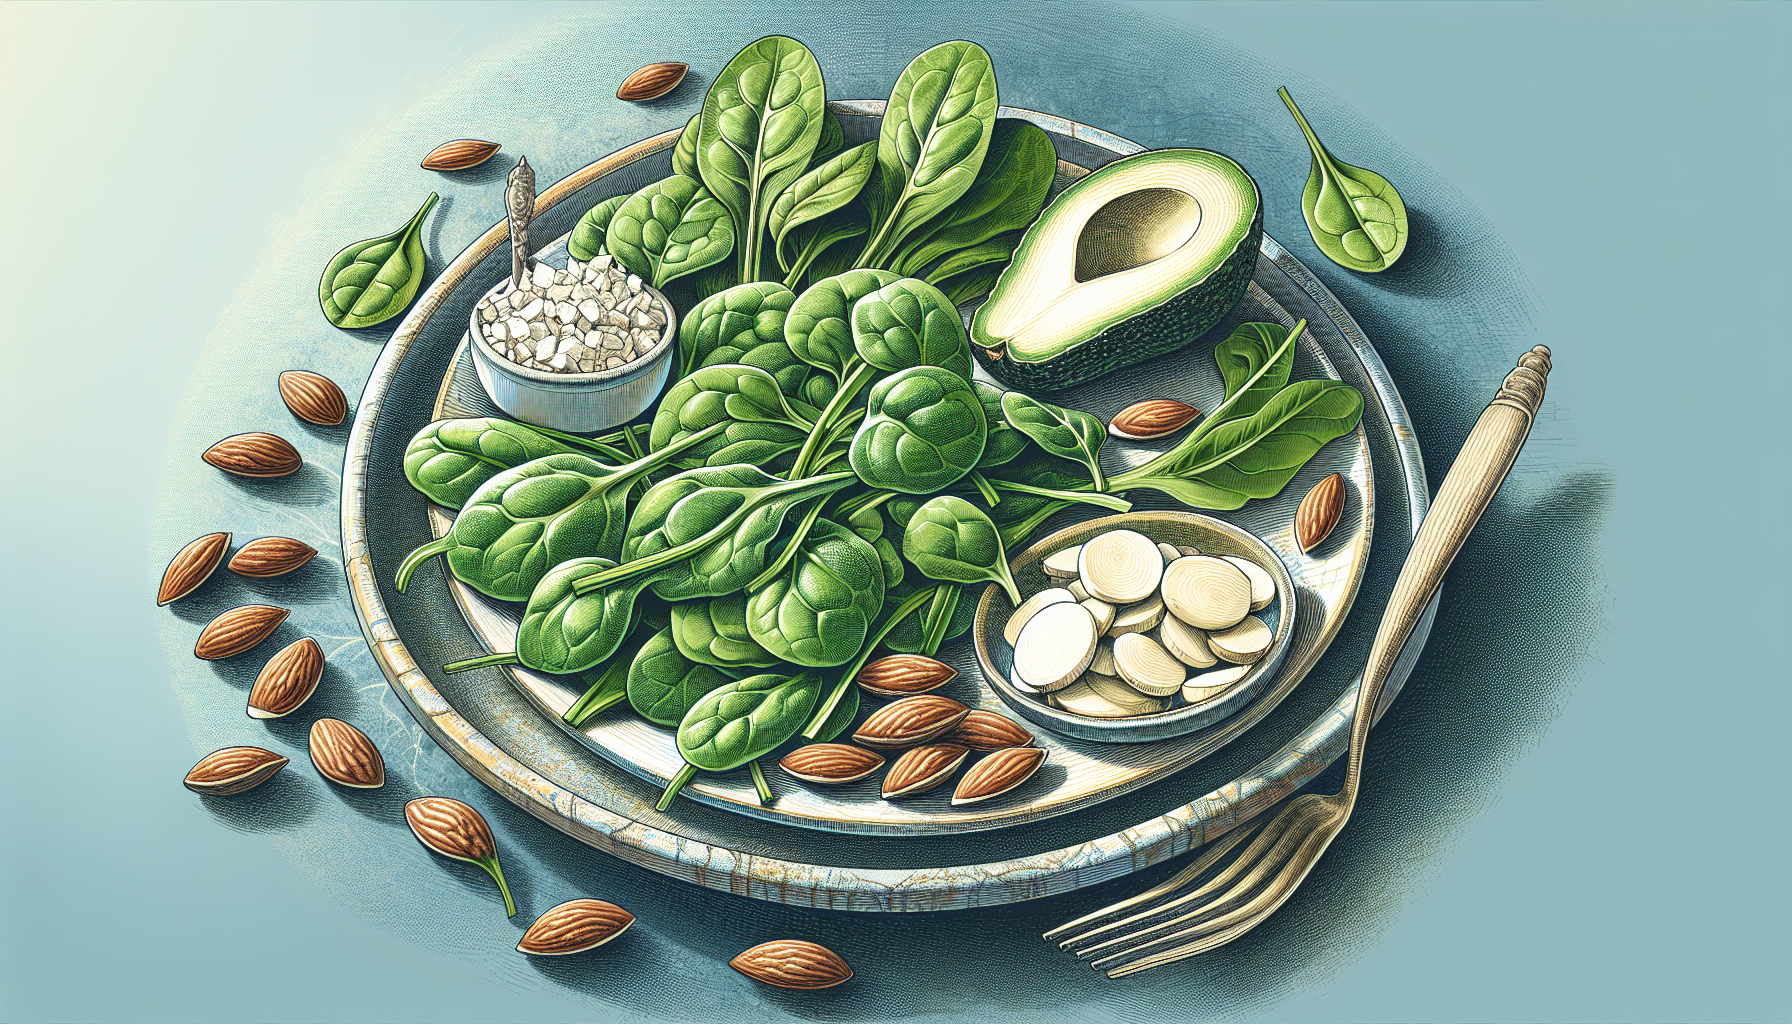 Illustration of a plate with magnesium-rich foods